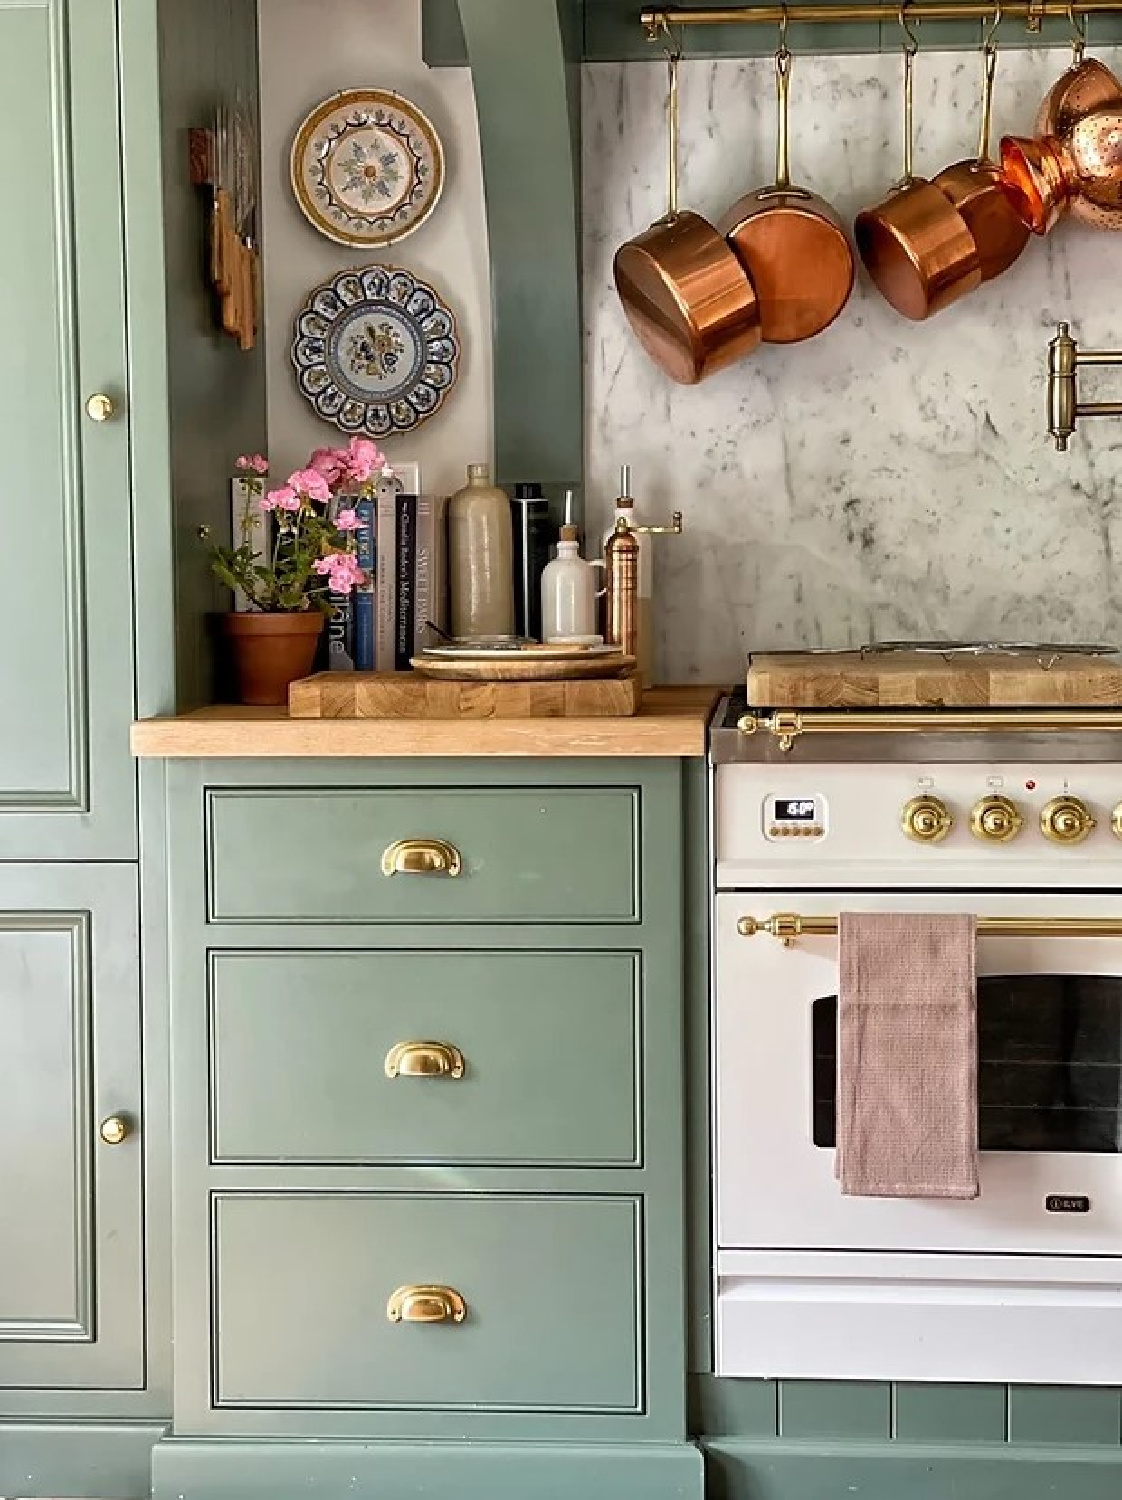 Vivi et Margot waffle weave kitchen hand towel in brown on white Ilve range in a French kitchen with cabinets painted Green Smoke (Farrow & Ball). #vivietmargot #frenchkitchens